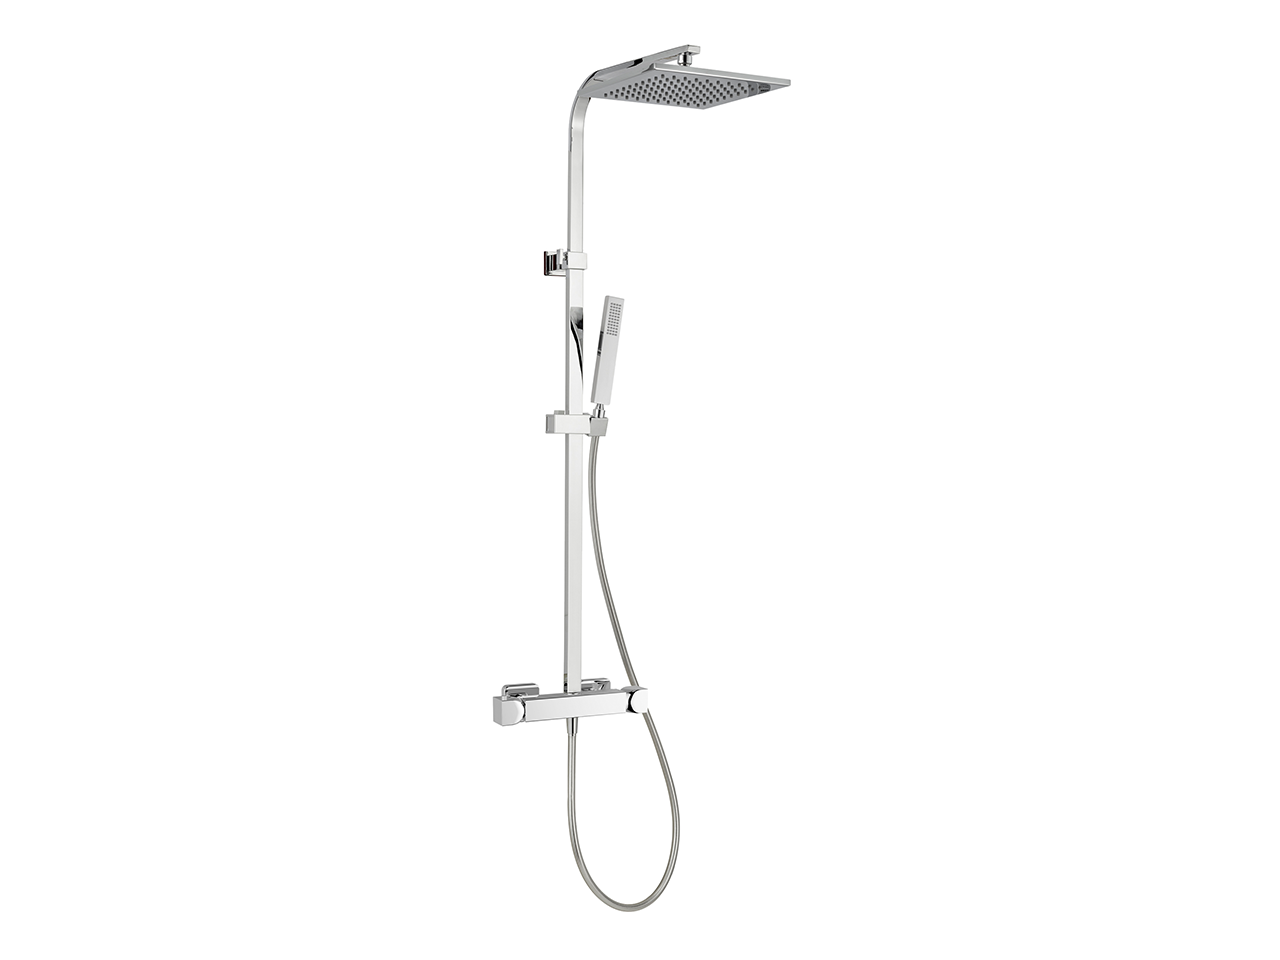 CisalThermostatic shower column, 2-functions HI-RISE_RIC8601N